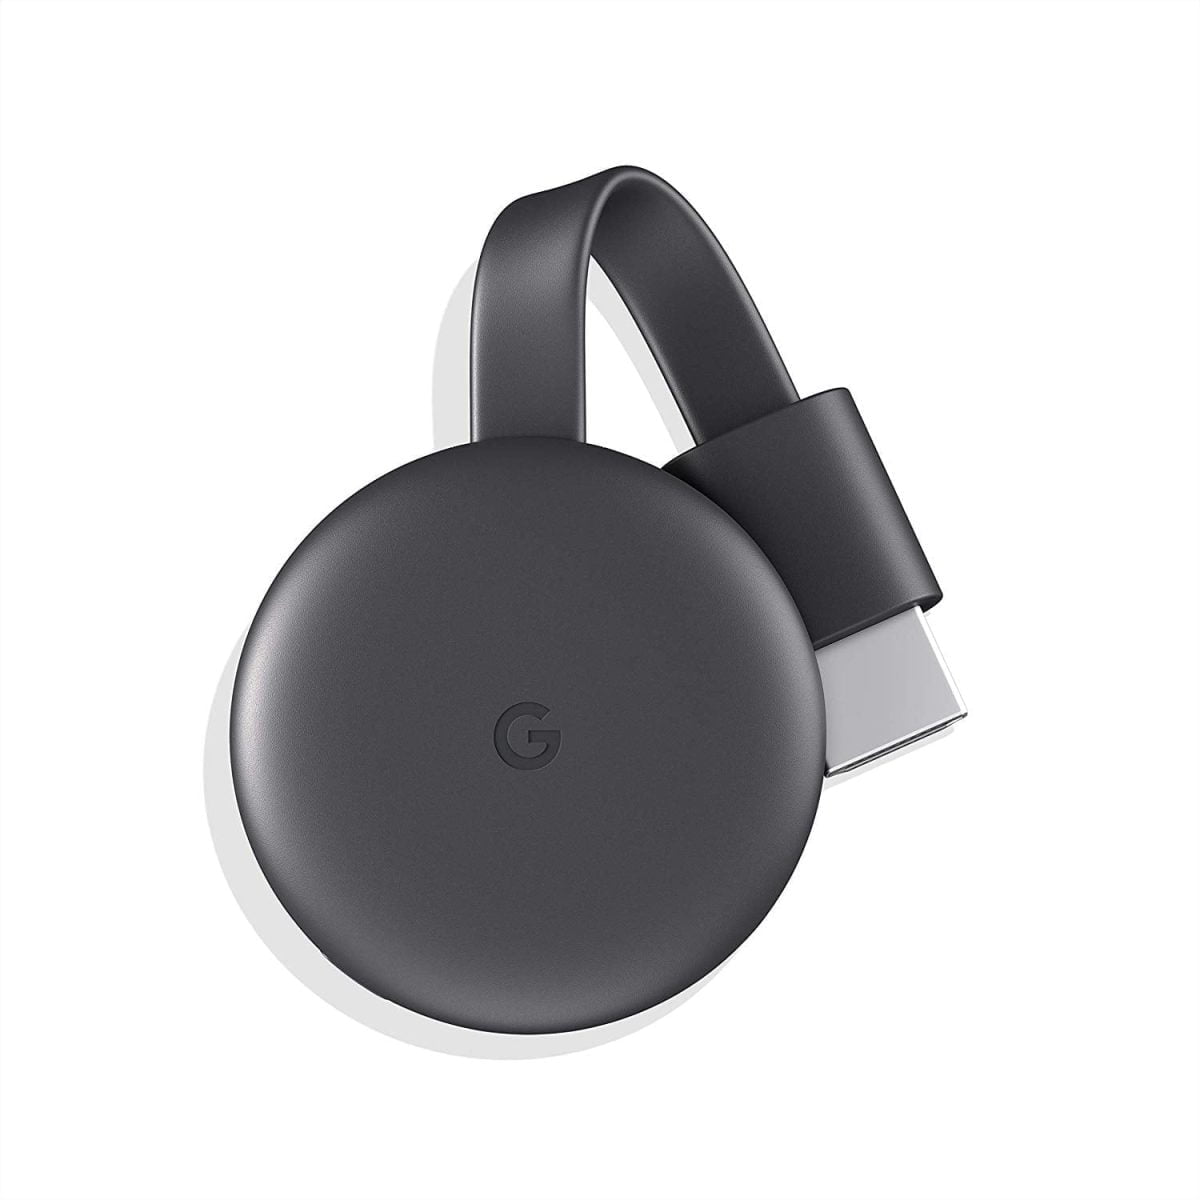 Google Chromecast 3Rd Gneration Media Streamer Google &Amp;Lt;Div Class=&Amp;Quot;Jsx-115903991 Jsx-3349621030&Amp;Quot;&Amp;Gt; &Amp;Lt;Div Class=&Amp;Quot;Jsx-1889249662 Overviewsection&Amp;Quot;&Amp;Gt;Google Chromecast 3 Makes Your Tv Smarter! You Can Now Stream Entertainment Directly From Your Phone And Other Devices To Your Tv. Use Your Phone Or Device To Stream Tv Shows, Movies, Games And More From 800+ Plus Compatible Apps, Including Youtube, Netflix, Hotstar, Sonyliv, Gaana Etc. With 15% Higher Hardware Speed, The New Chromecast Supports 1080P And Is Google Assistant-Enabled. Chromecast Plugs Into Your Tv'S Hdmi Port And Works With Iphone, Ipad, Android Phone And Tablet, Mac And Windows Laptop And Chromebook. During Streaming, Your Device Is Free To Be Used For Calls, Messages Without Interrupting The Tv Screen. You Can Control The Playback From Any Part Of The Wifi-Enabled House. No Additional Remote(S) Required.&Amp;Lt;/Div&Amp;Gt; &Amp;Lt;/Div&Amp;Gt; &Amp;Nbsp; Google Chromecast 3Rd Gneration Media Streamer Google Chromecast 3Rd Gneration Media Streamer